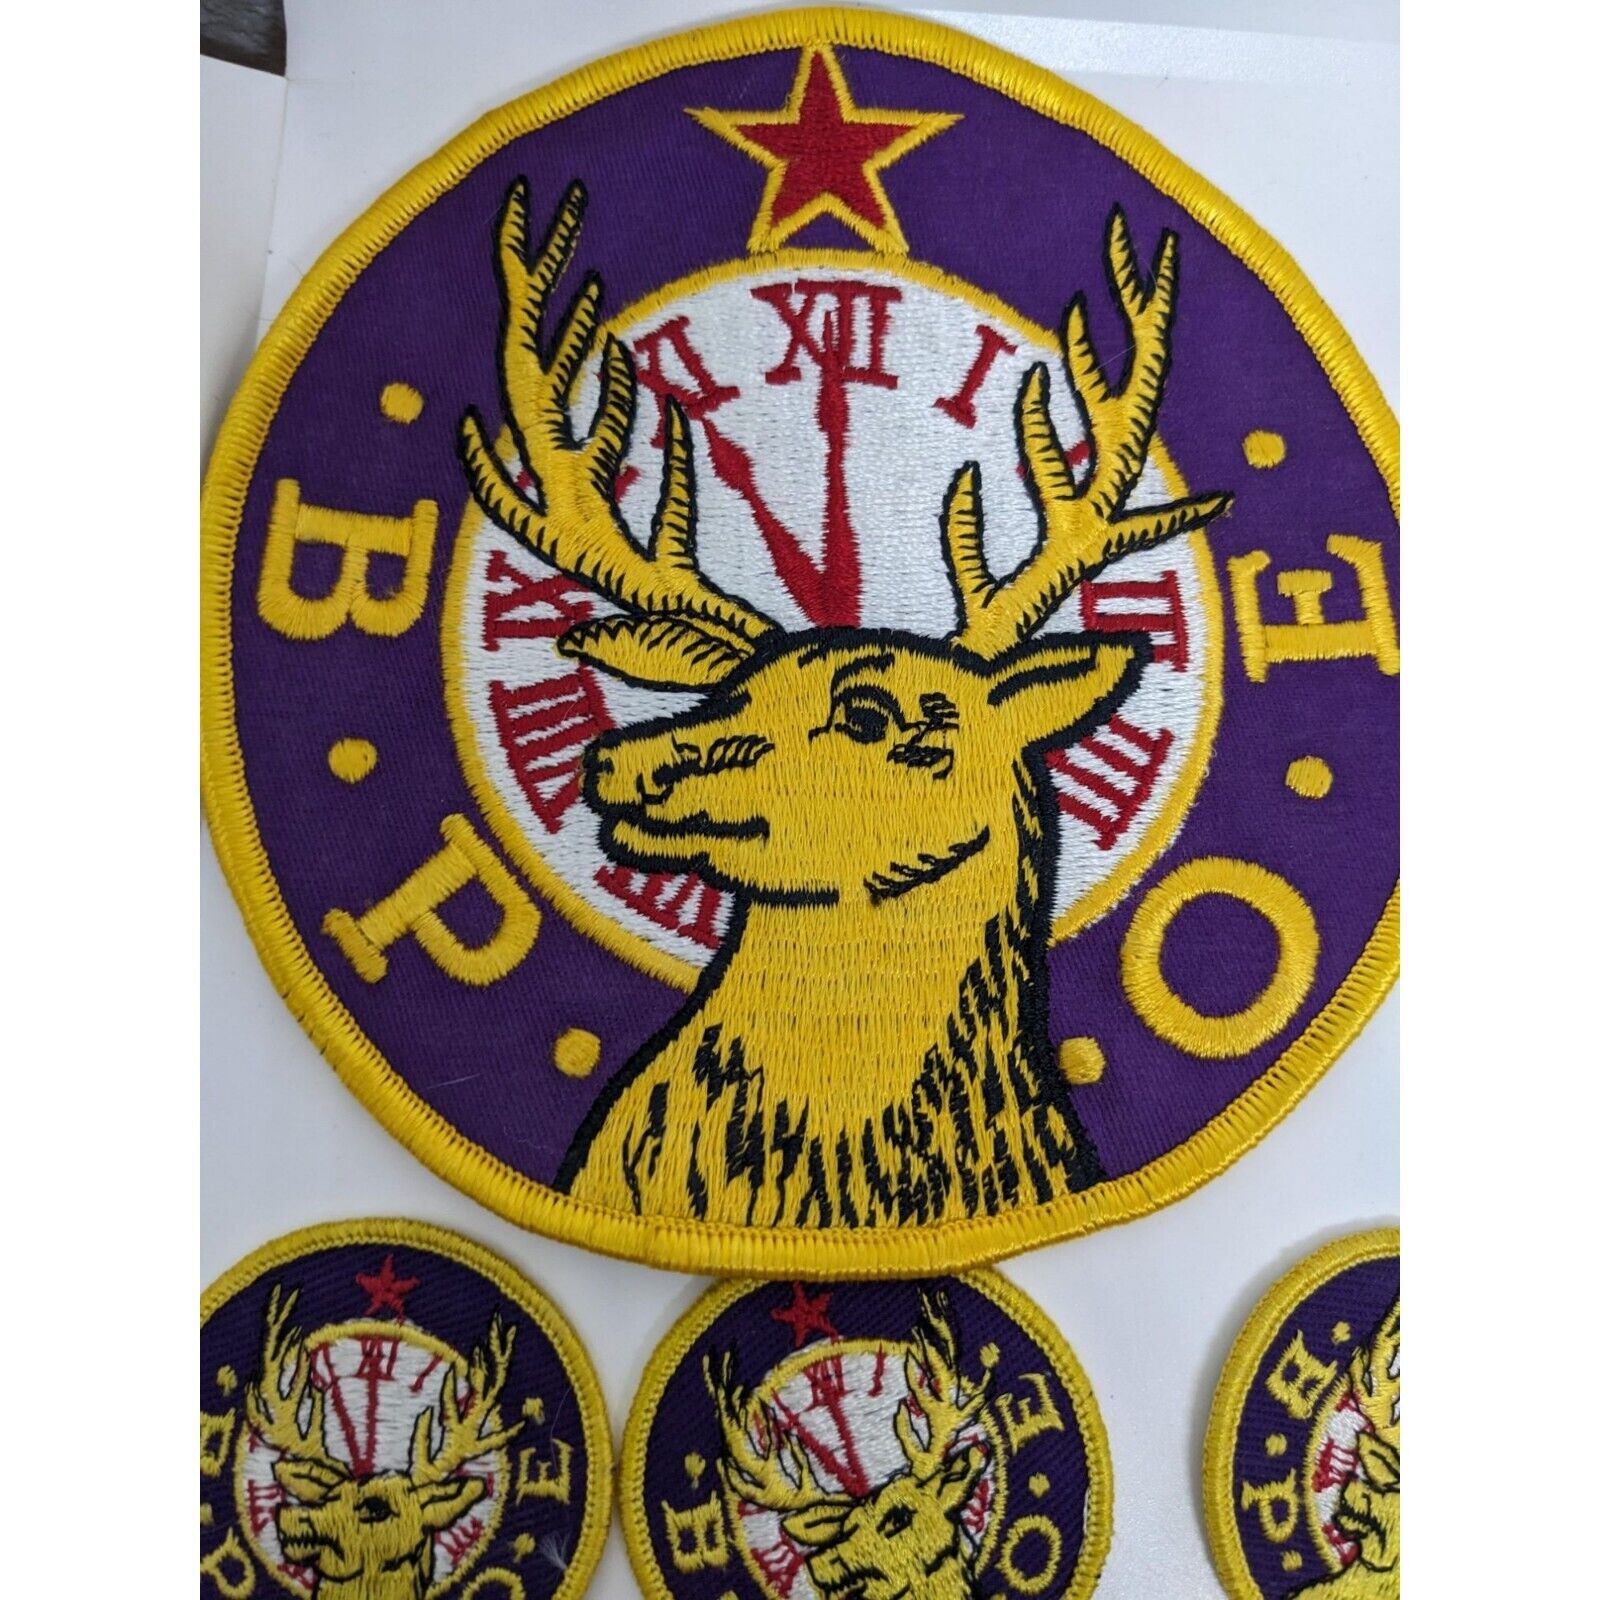 B.P.O.E. Elks Patches Lot of 2 big and 15 small